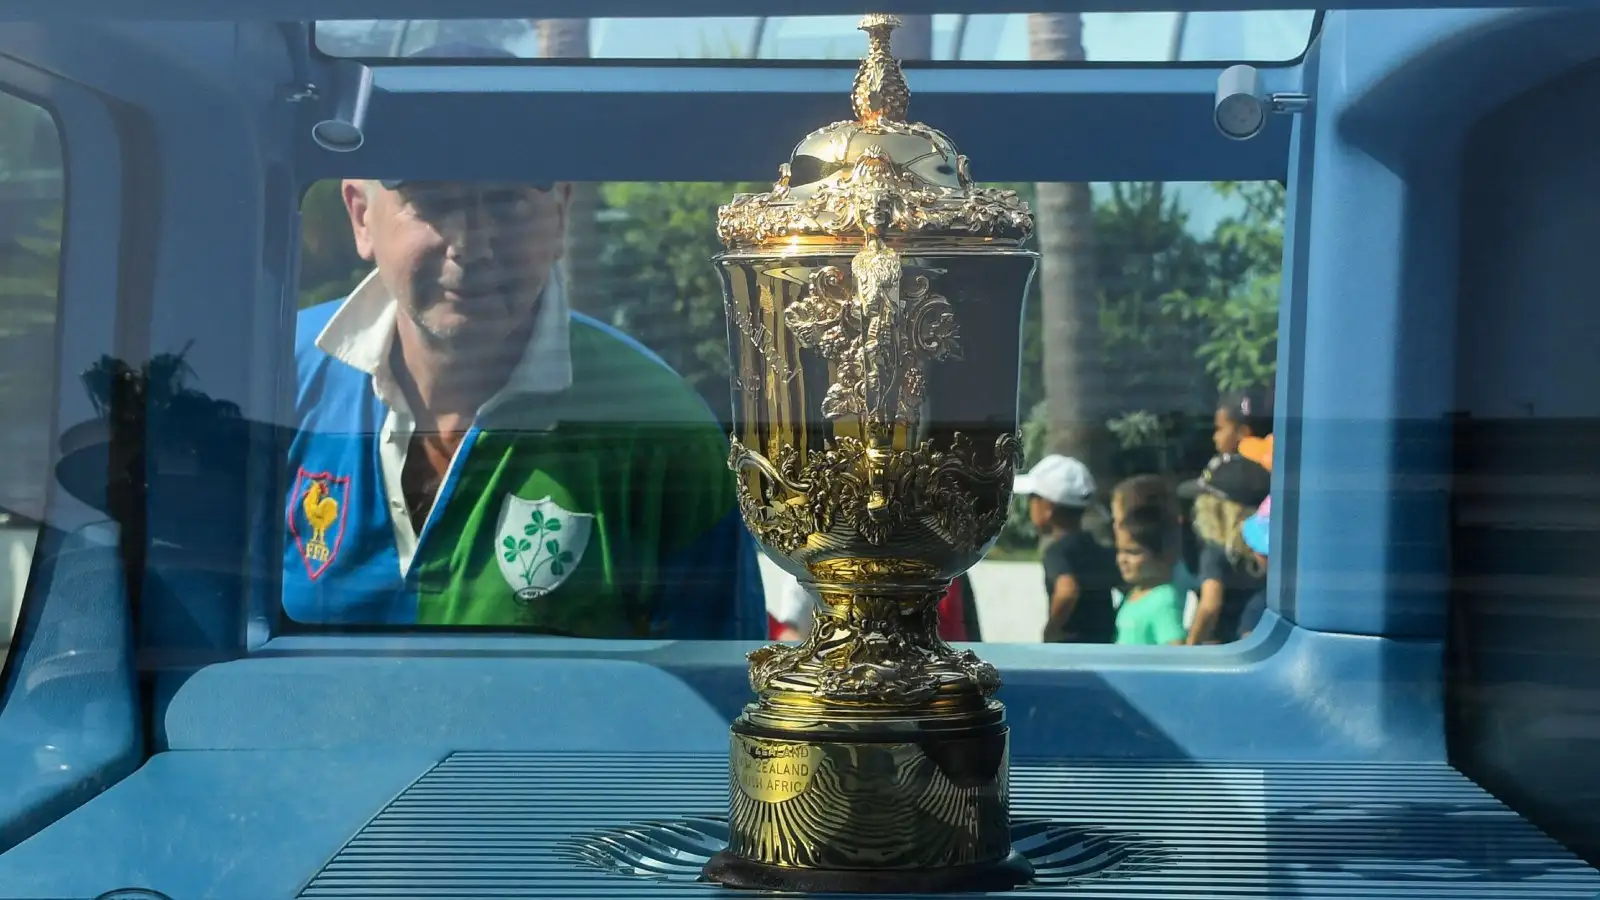 Rugby World Cup on display.